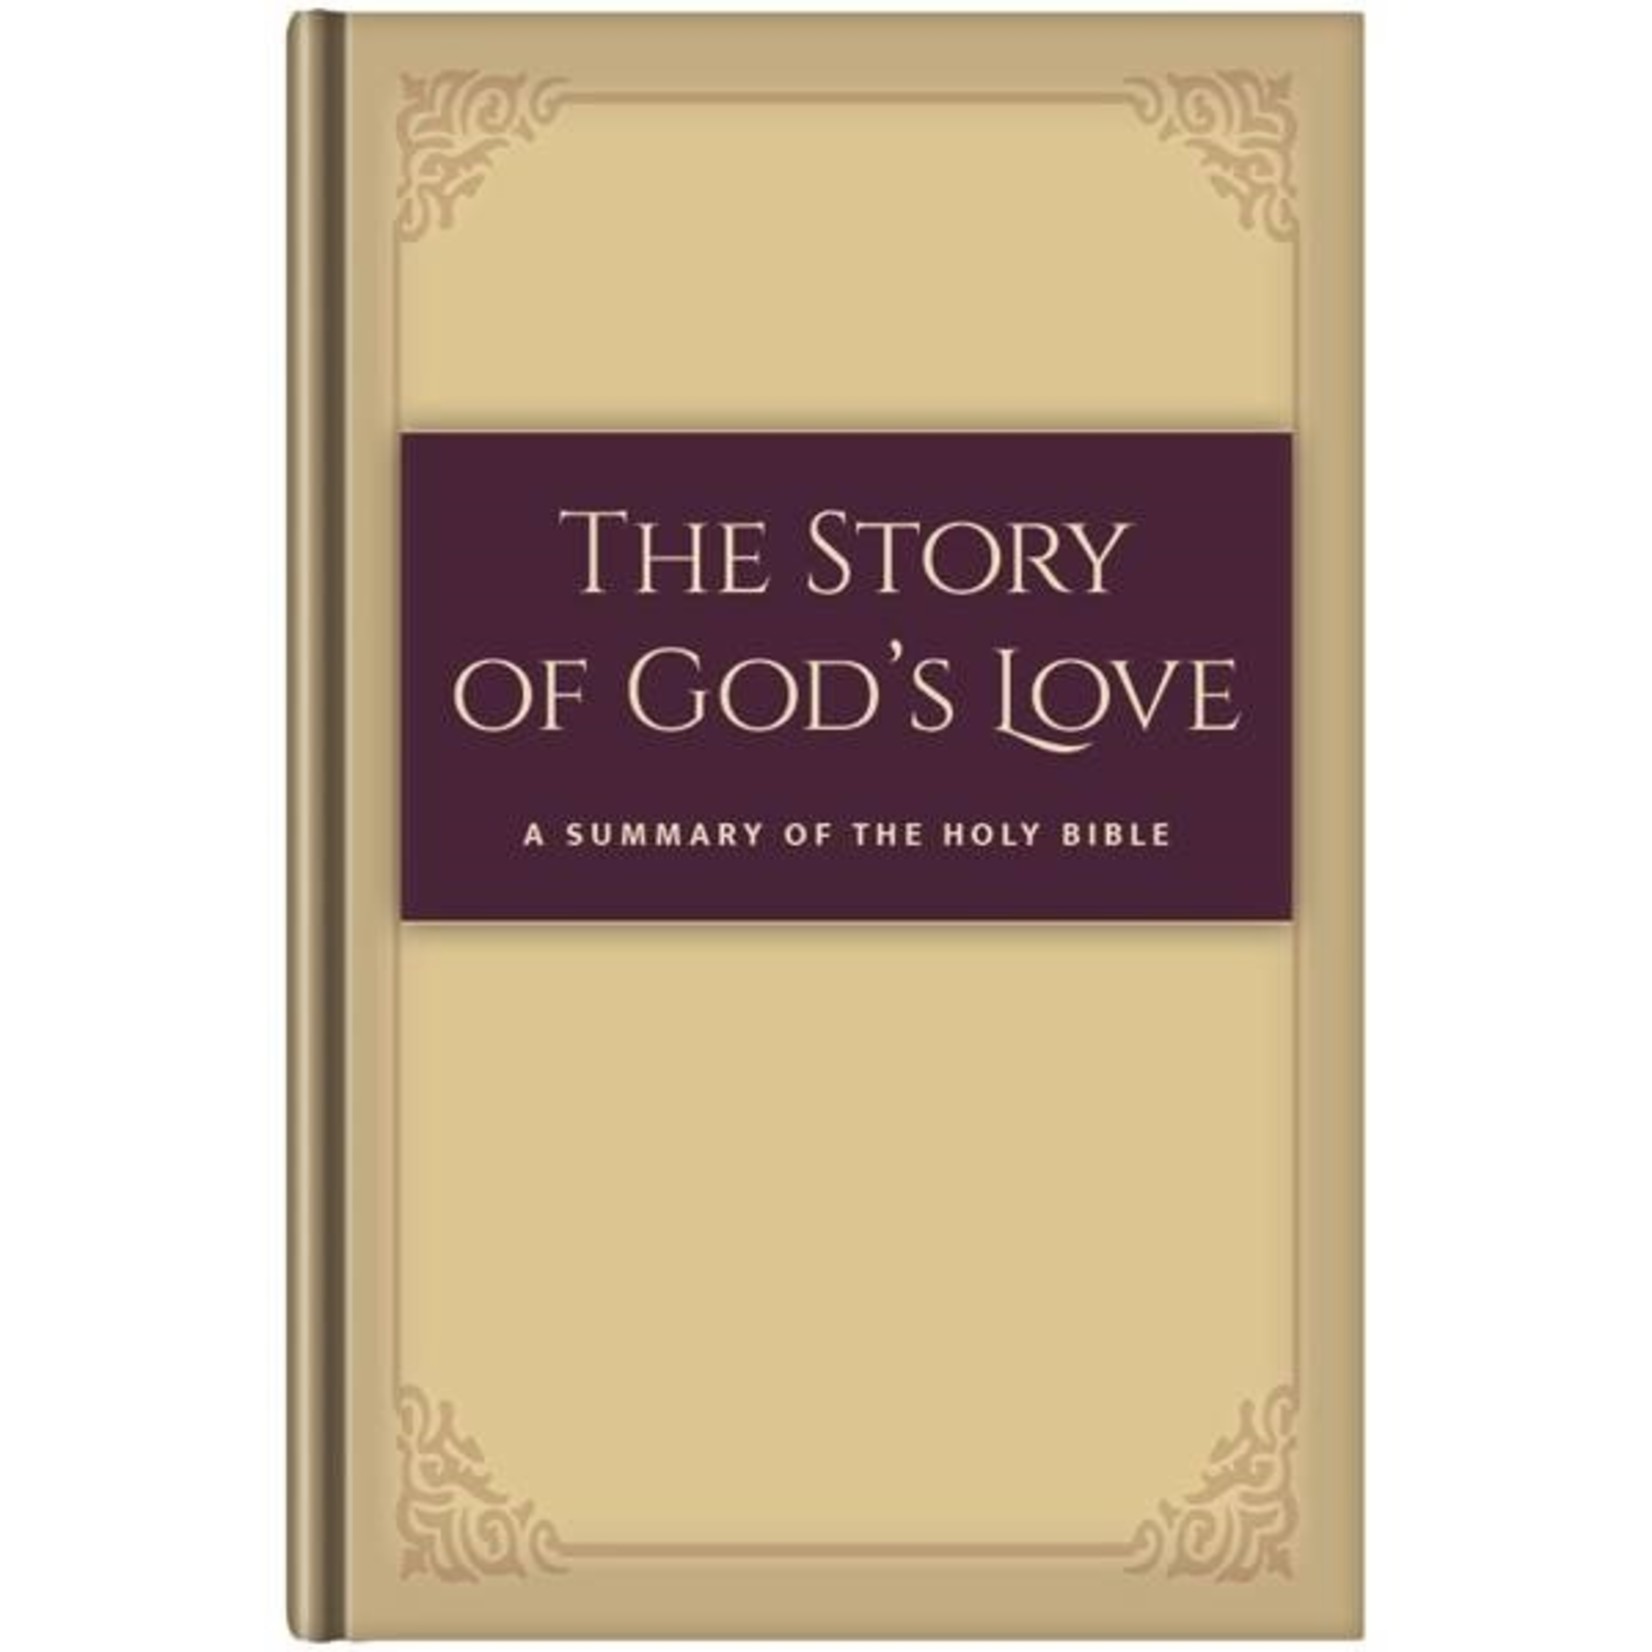 The Story of God's Love - A Summary of the Holy Bible (EHV)